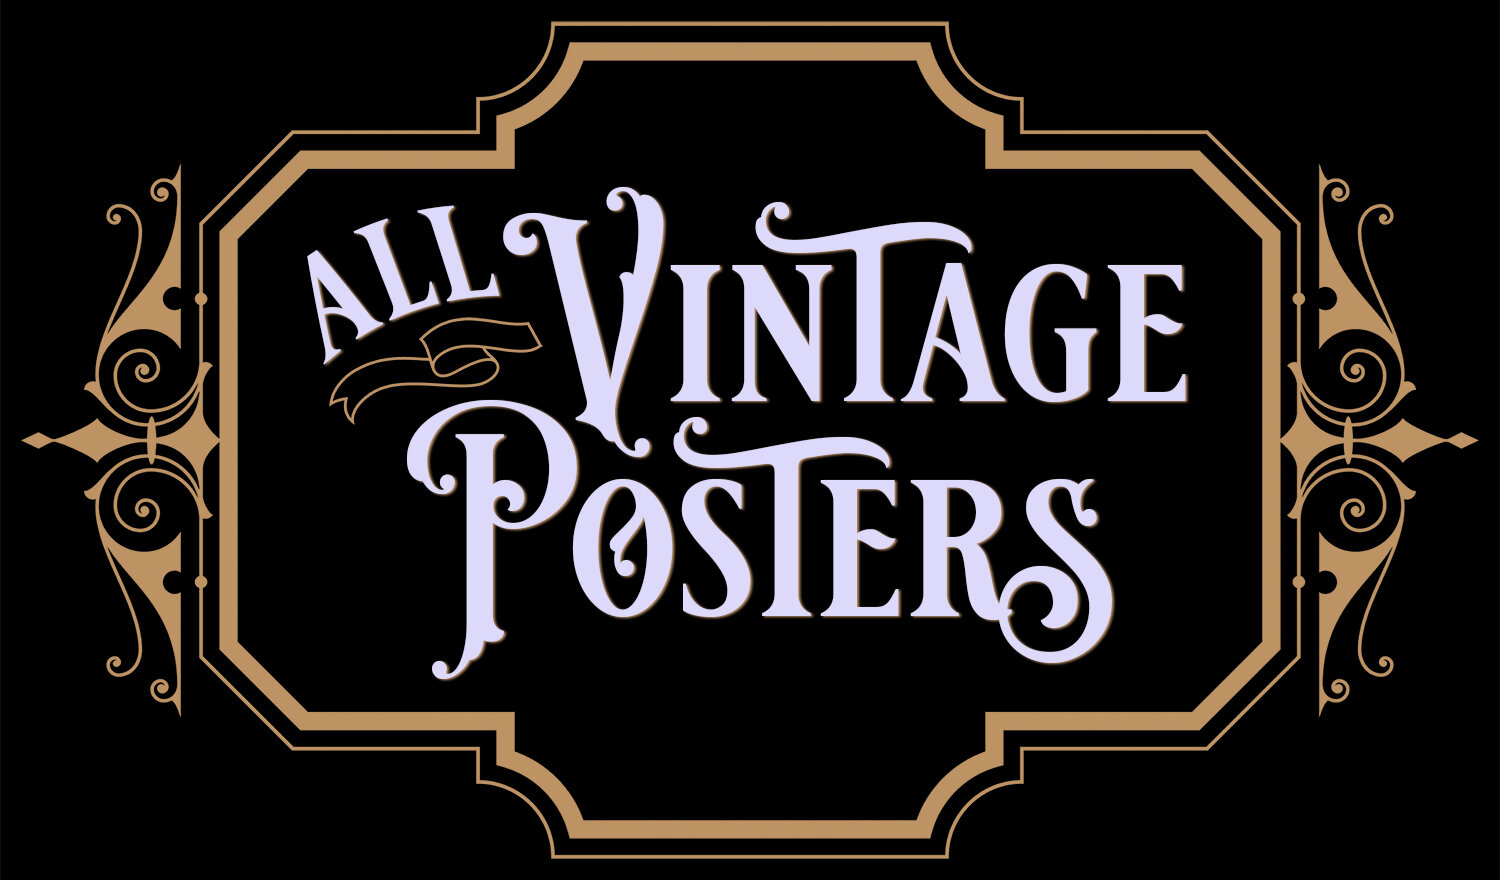 All Vintage Posters